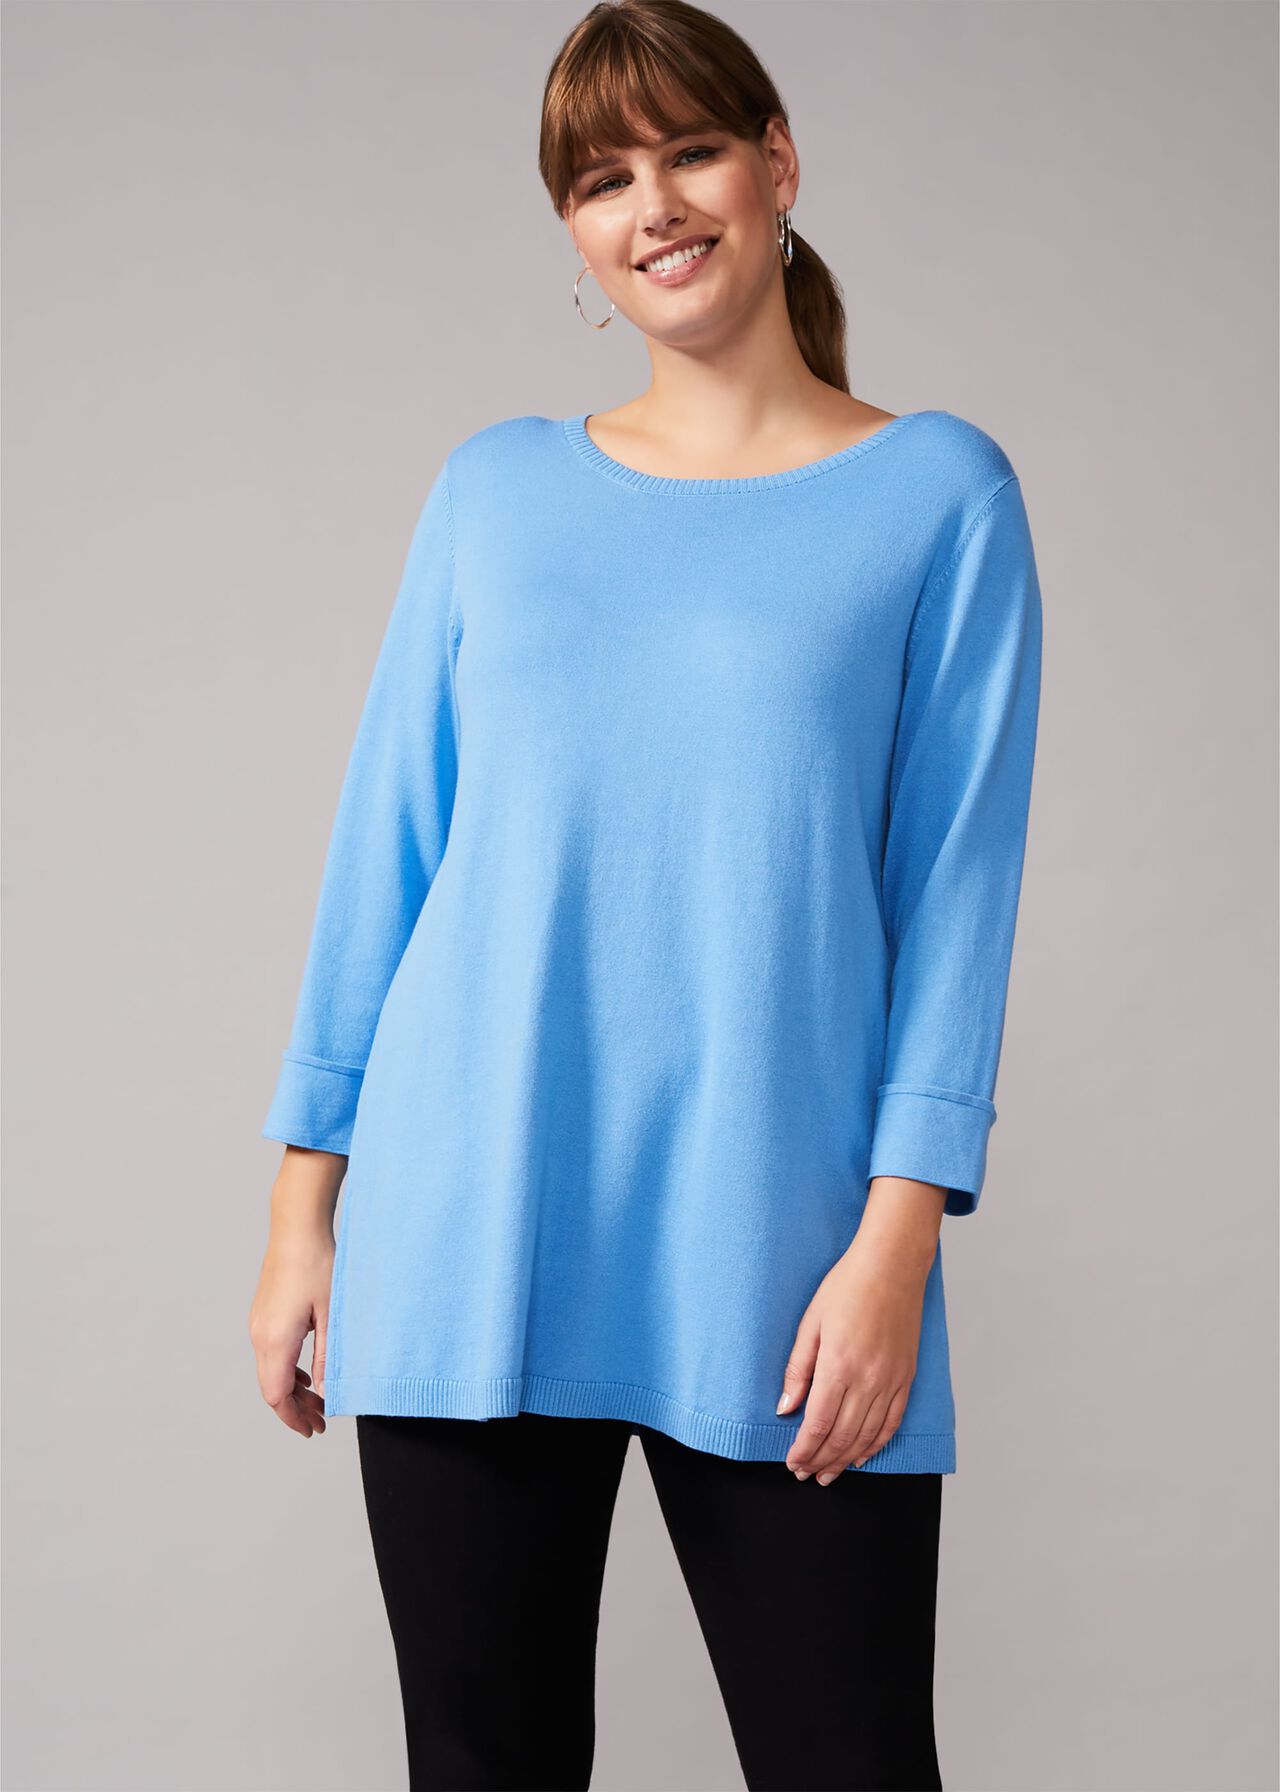 Sofie Knit Top